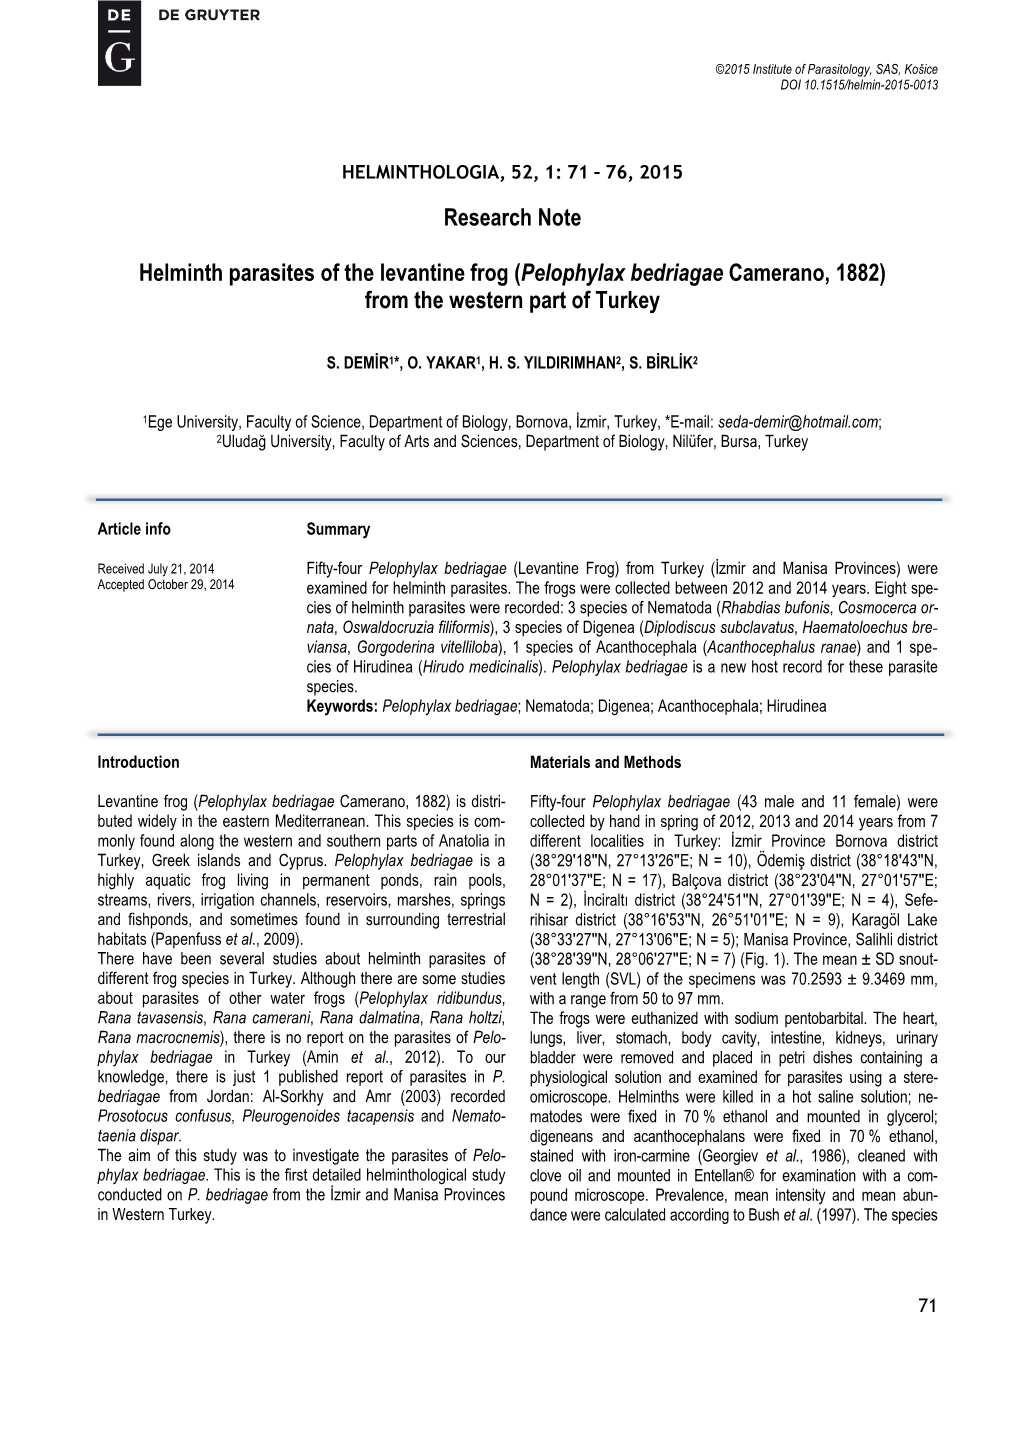 Research Note Helminth Parasites of the Levantine Frog (Pelophylax